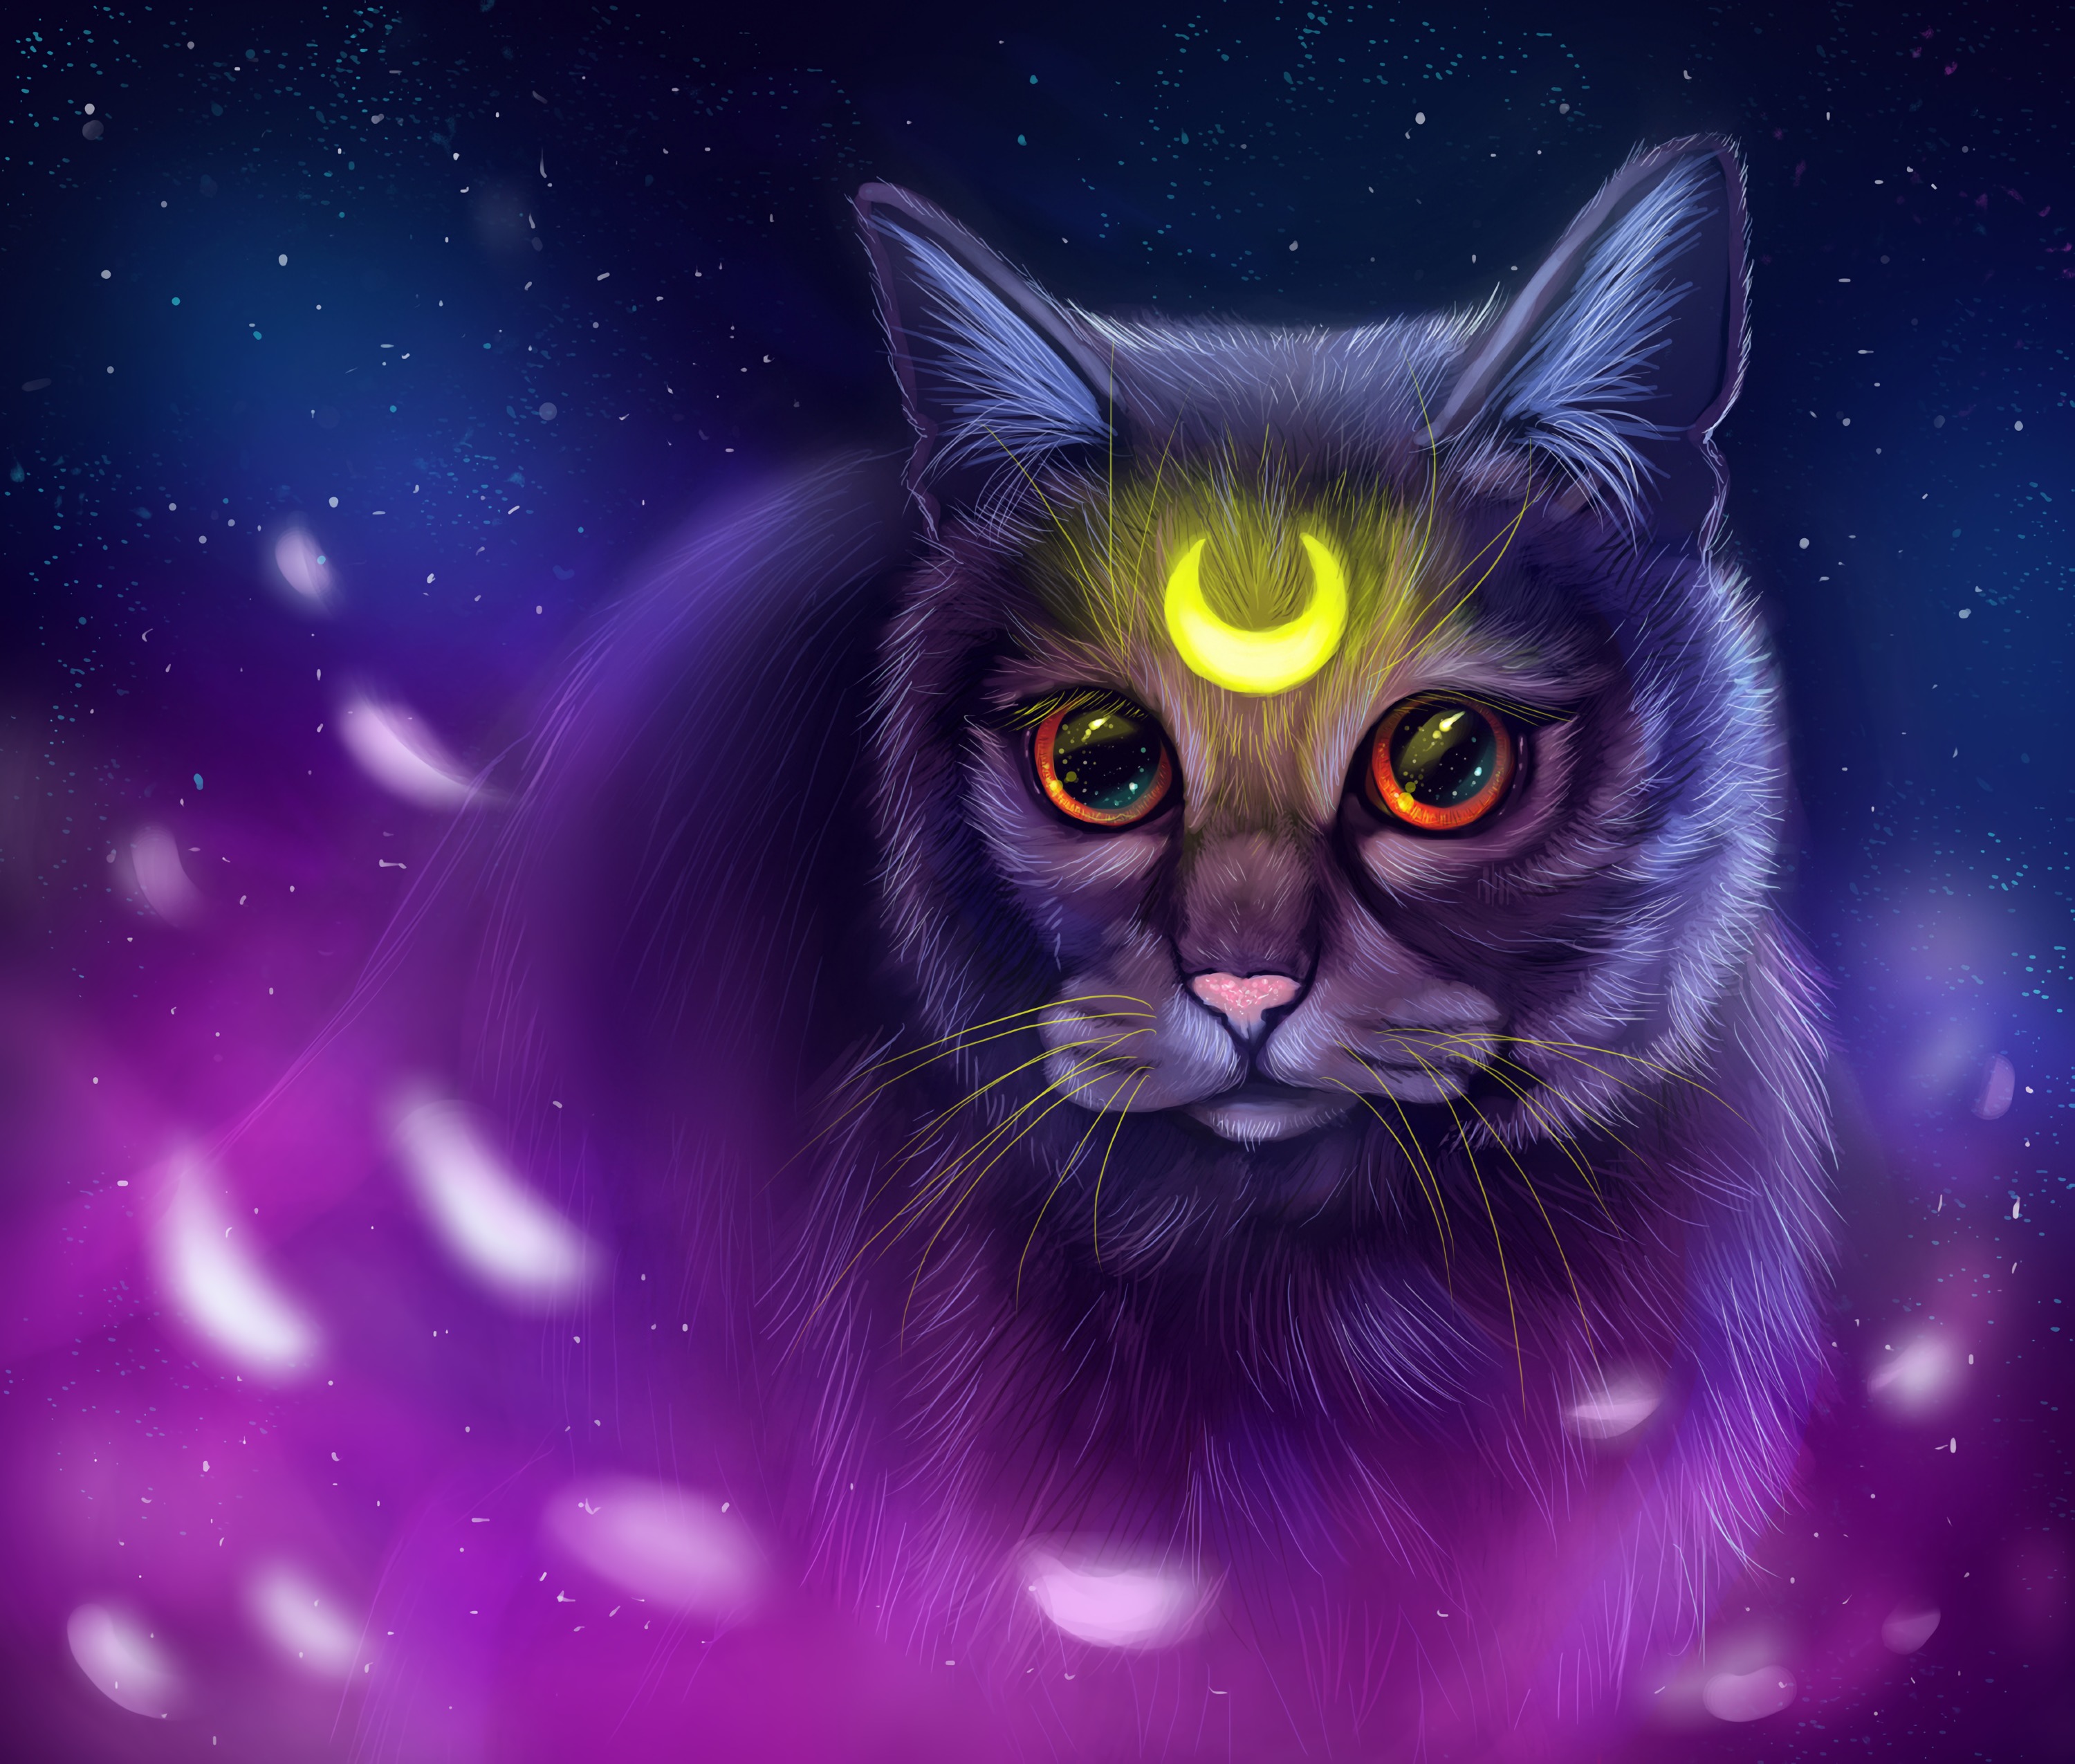 138647 download wallpaper cat, art, sight, opinion, glow, symbol screensavers and pictures for free